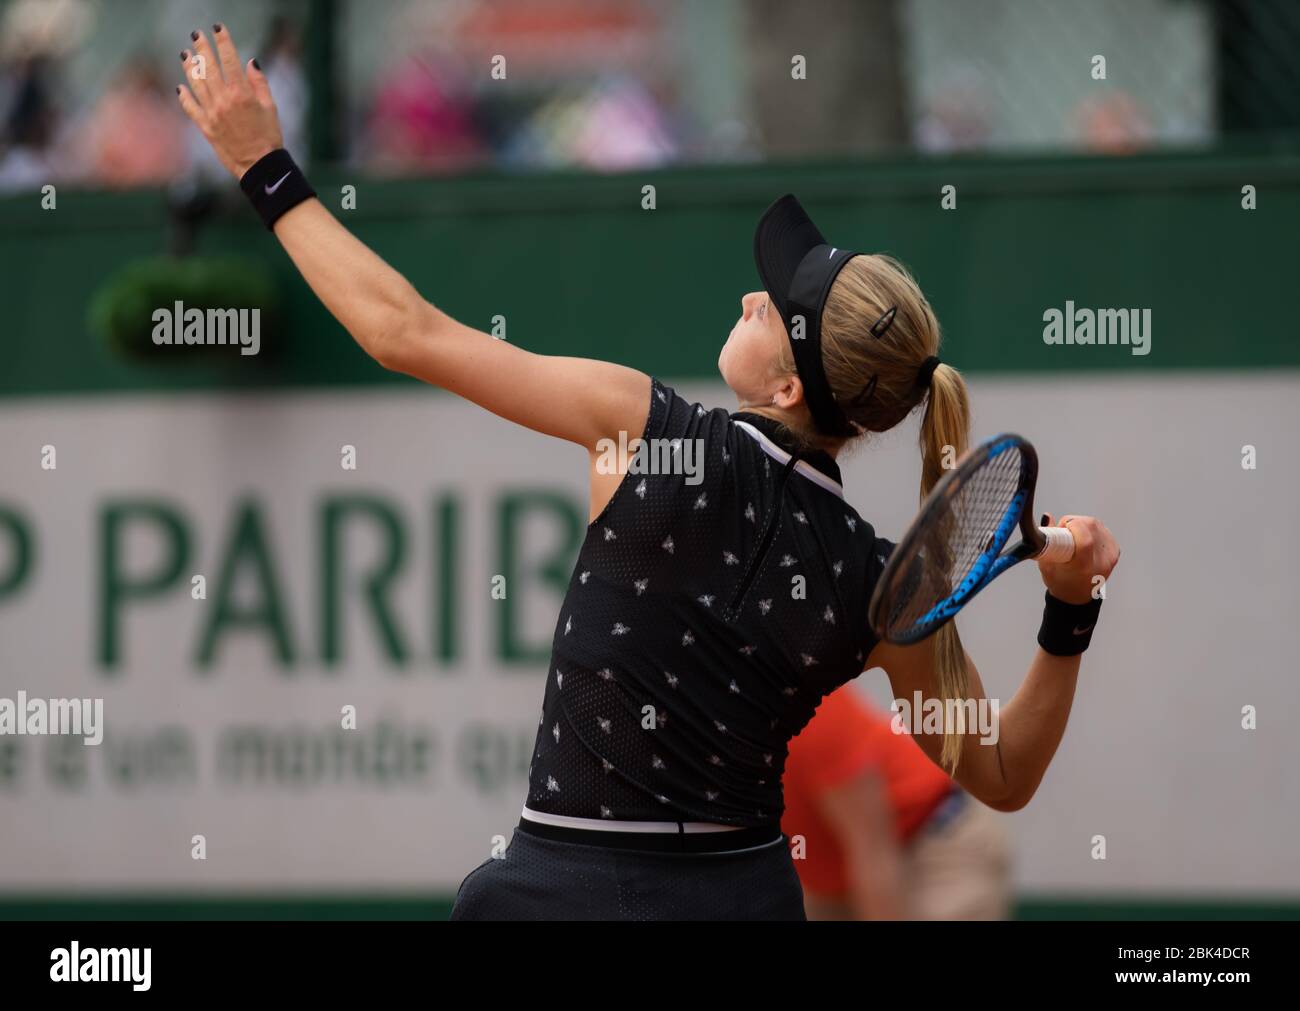 Katie Swan of Great Britain in action during the second qualifications round at the 2019 Roland Garros Grand Slam tennis tournament Stock Photo